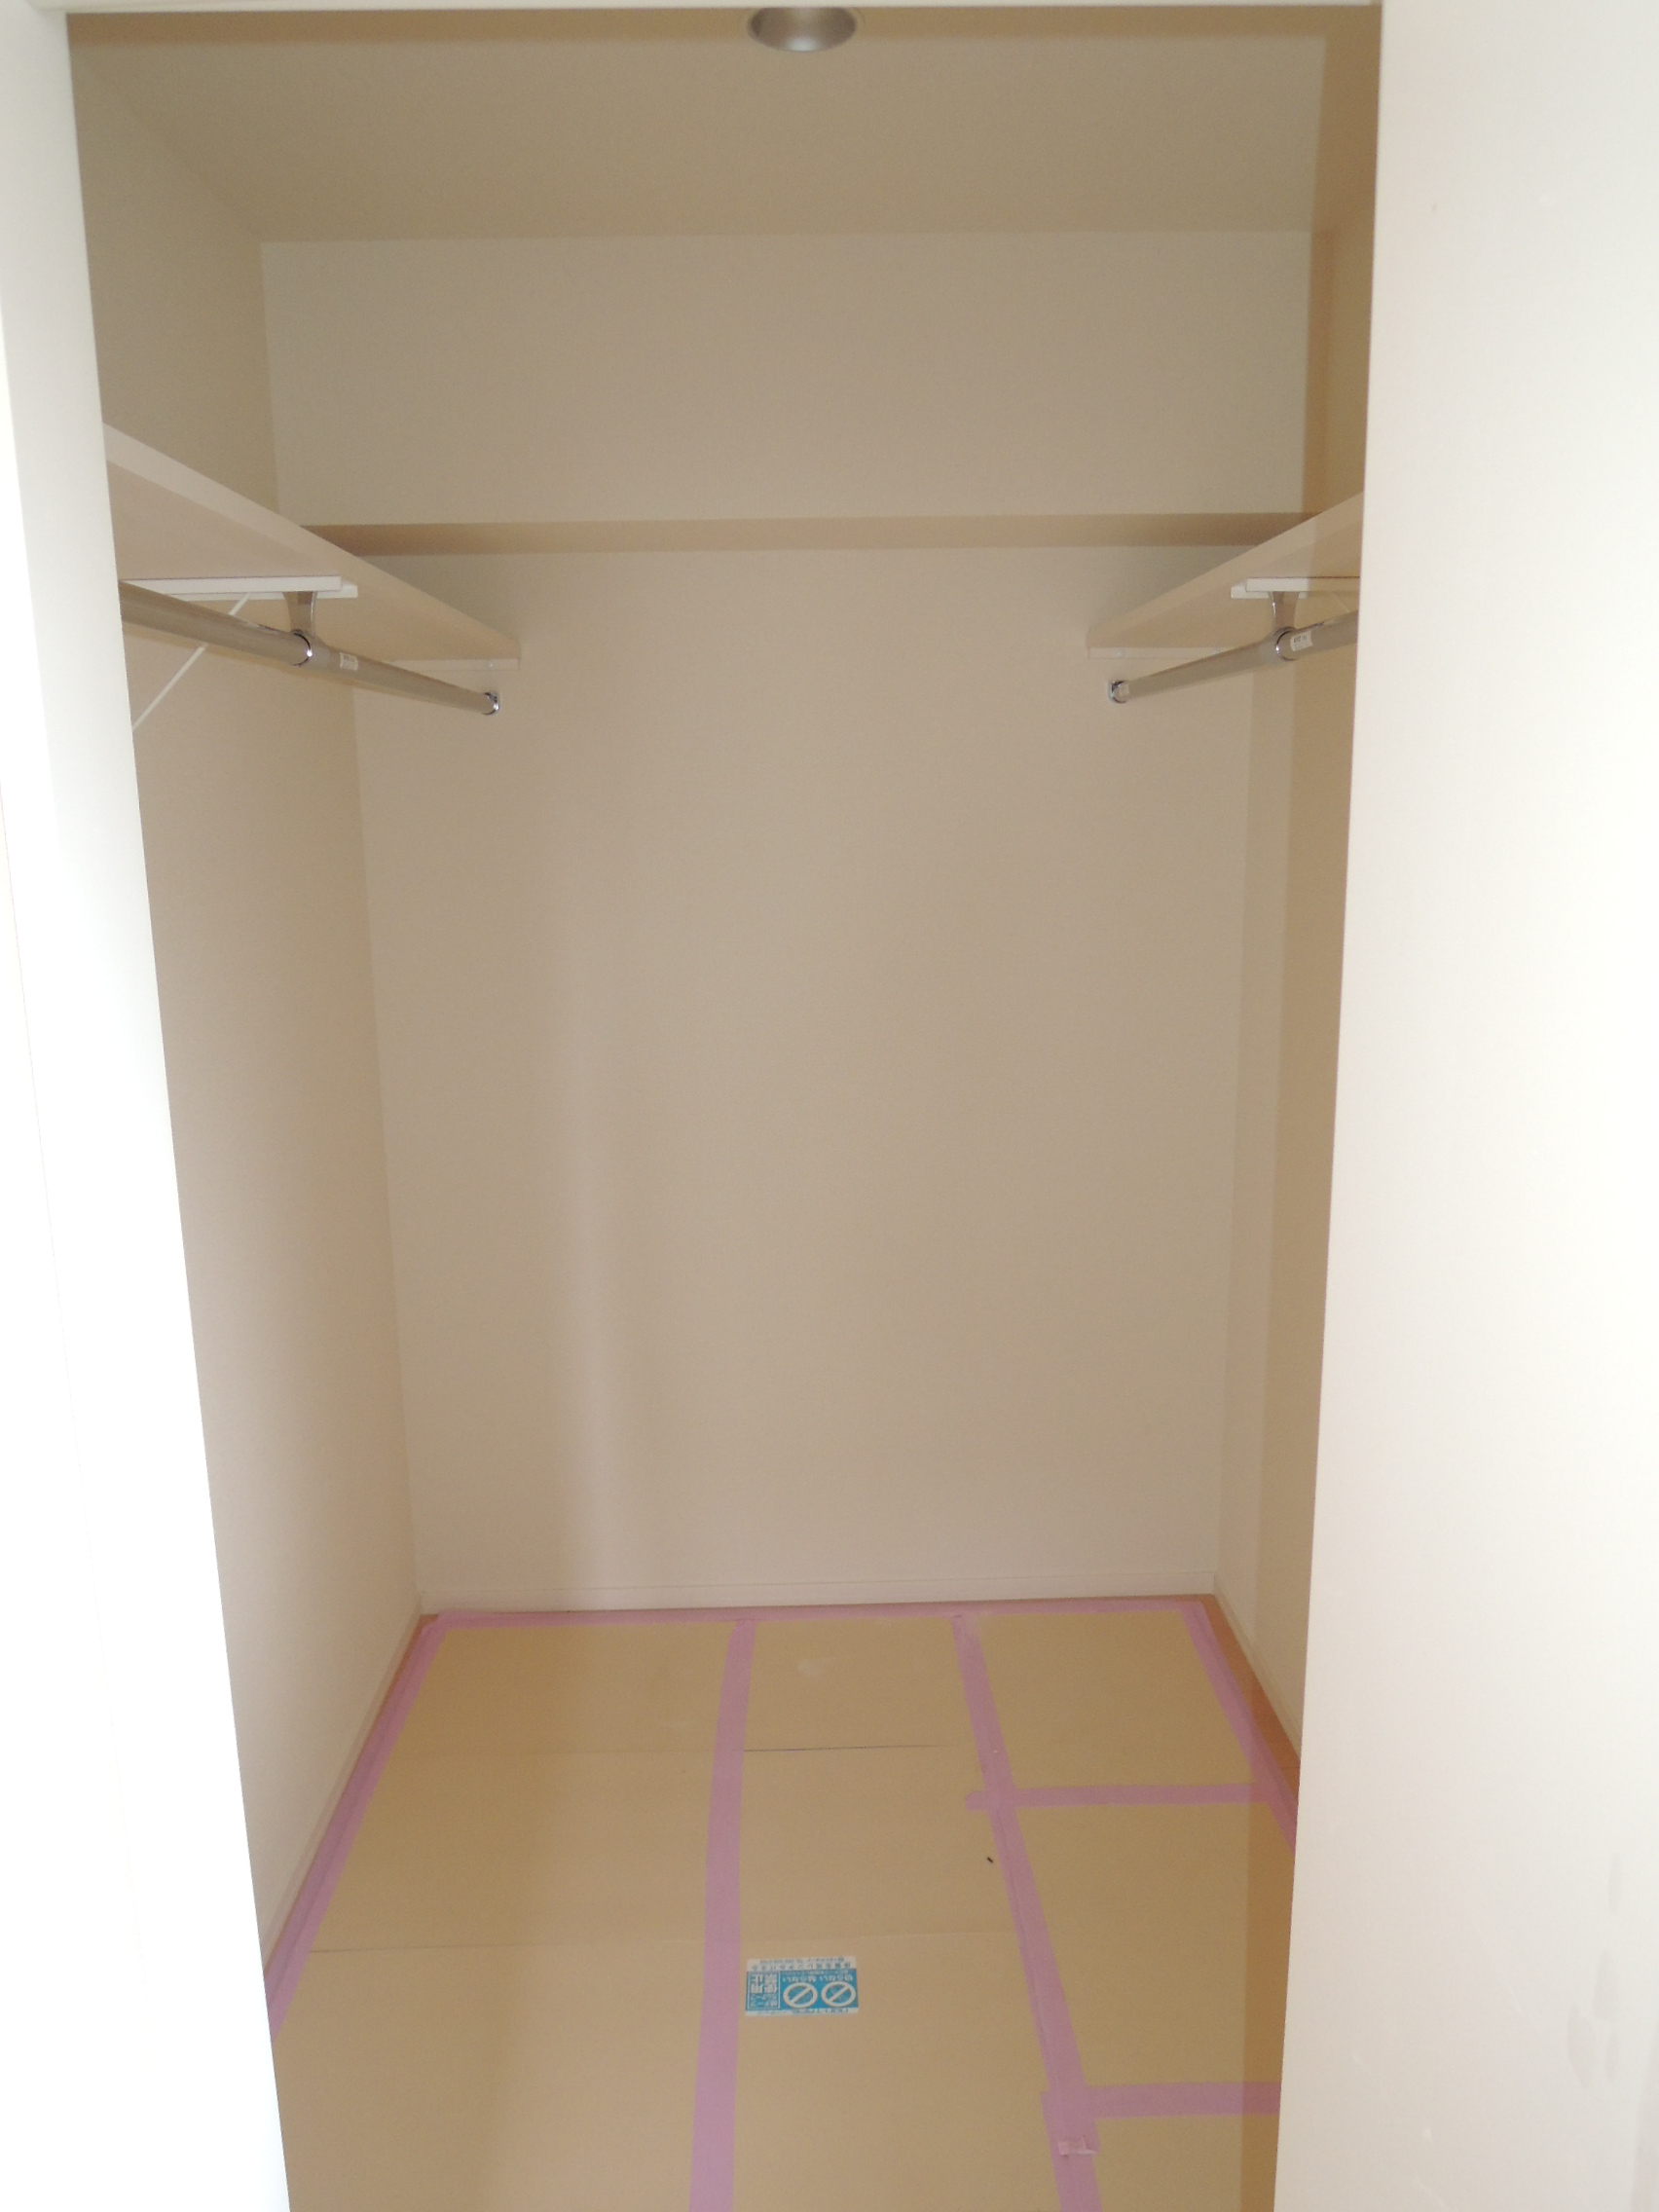 Other. Walk-in closet (2.3 quire)